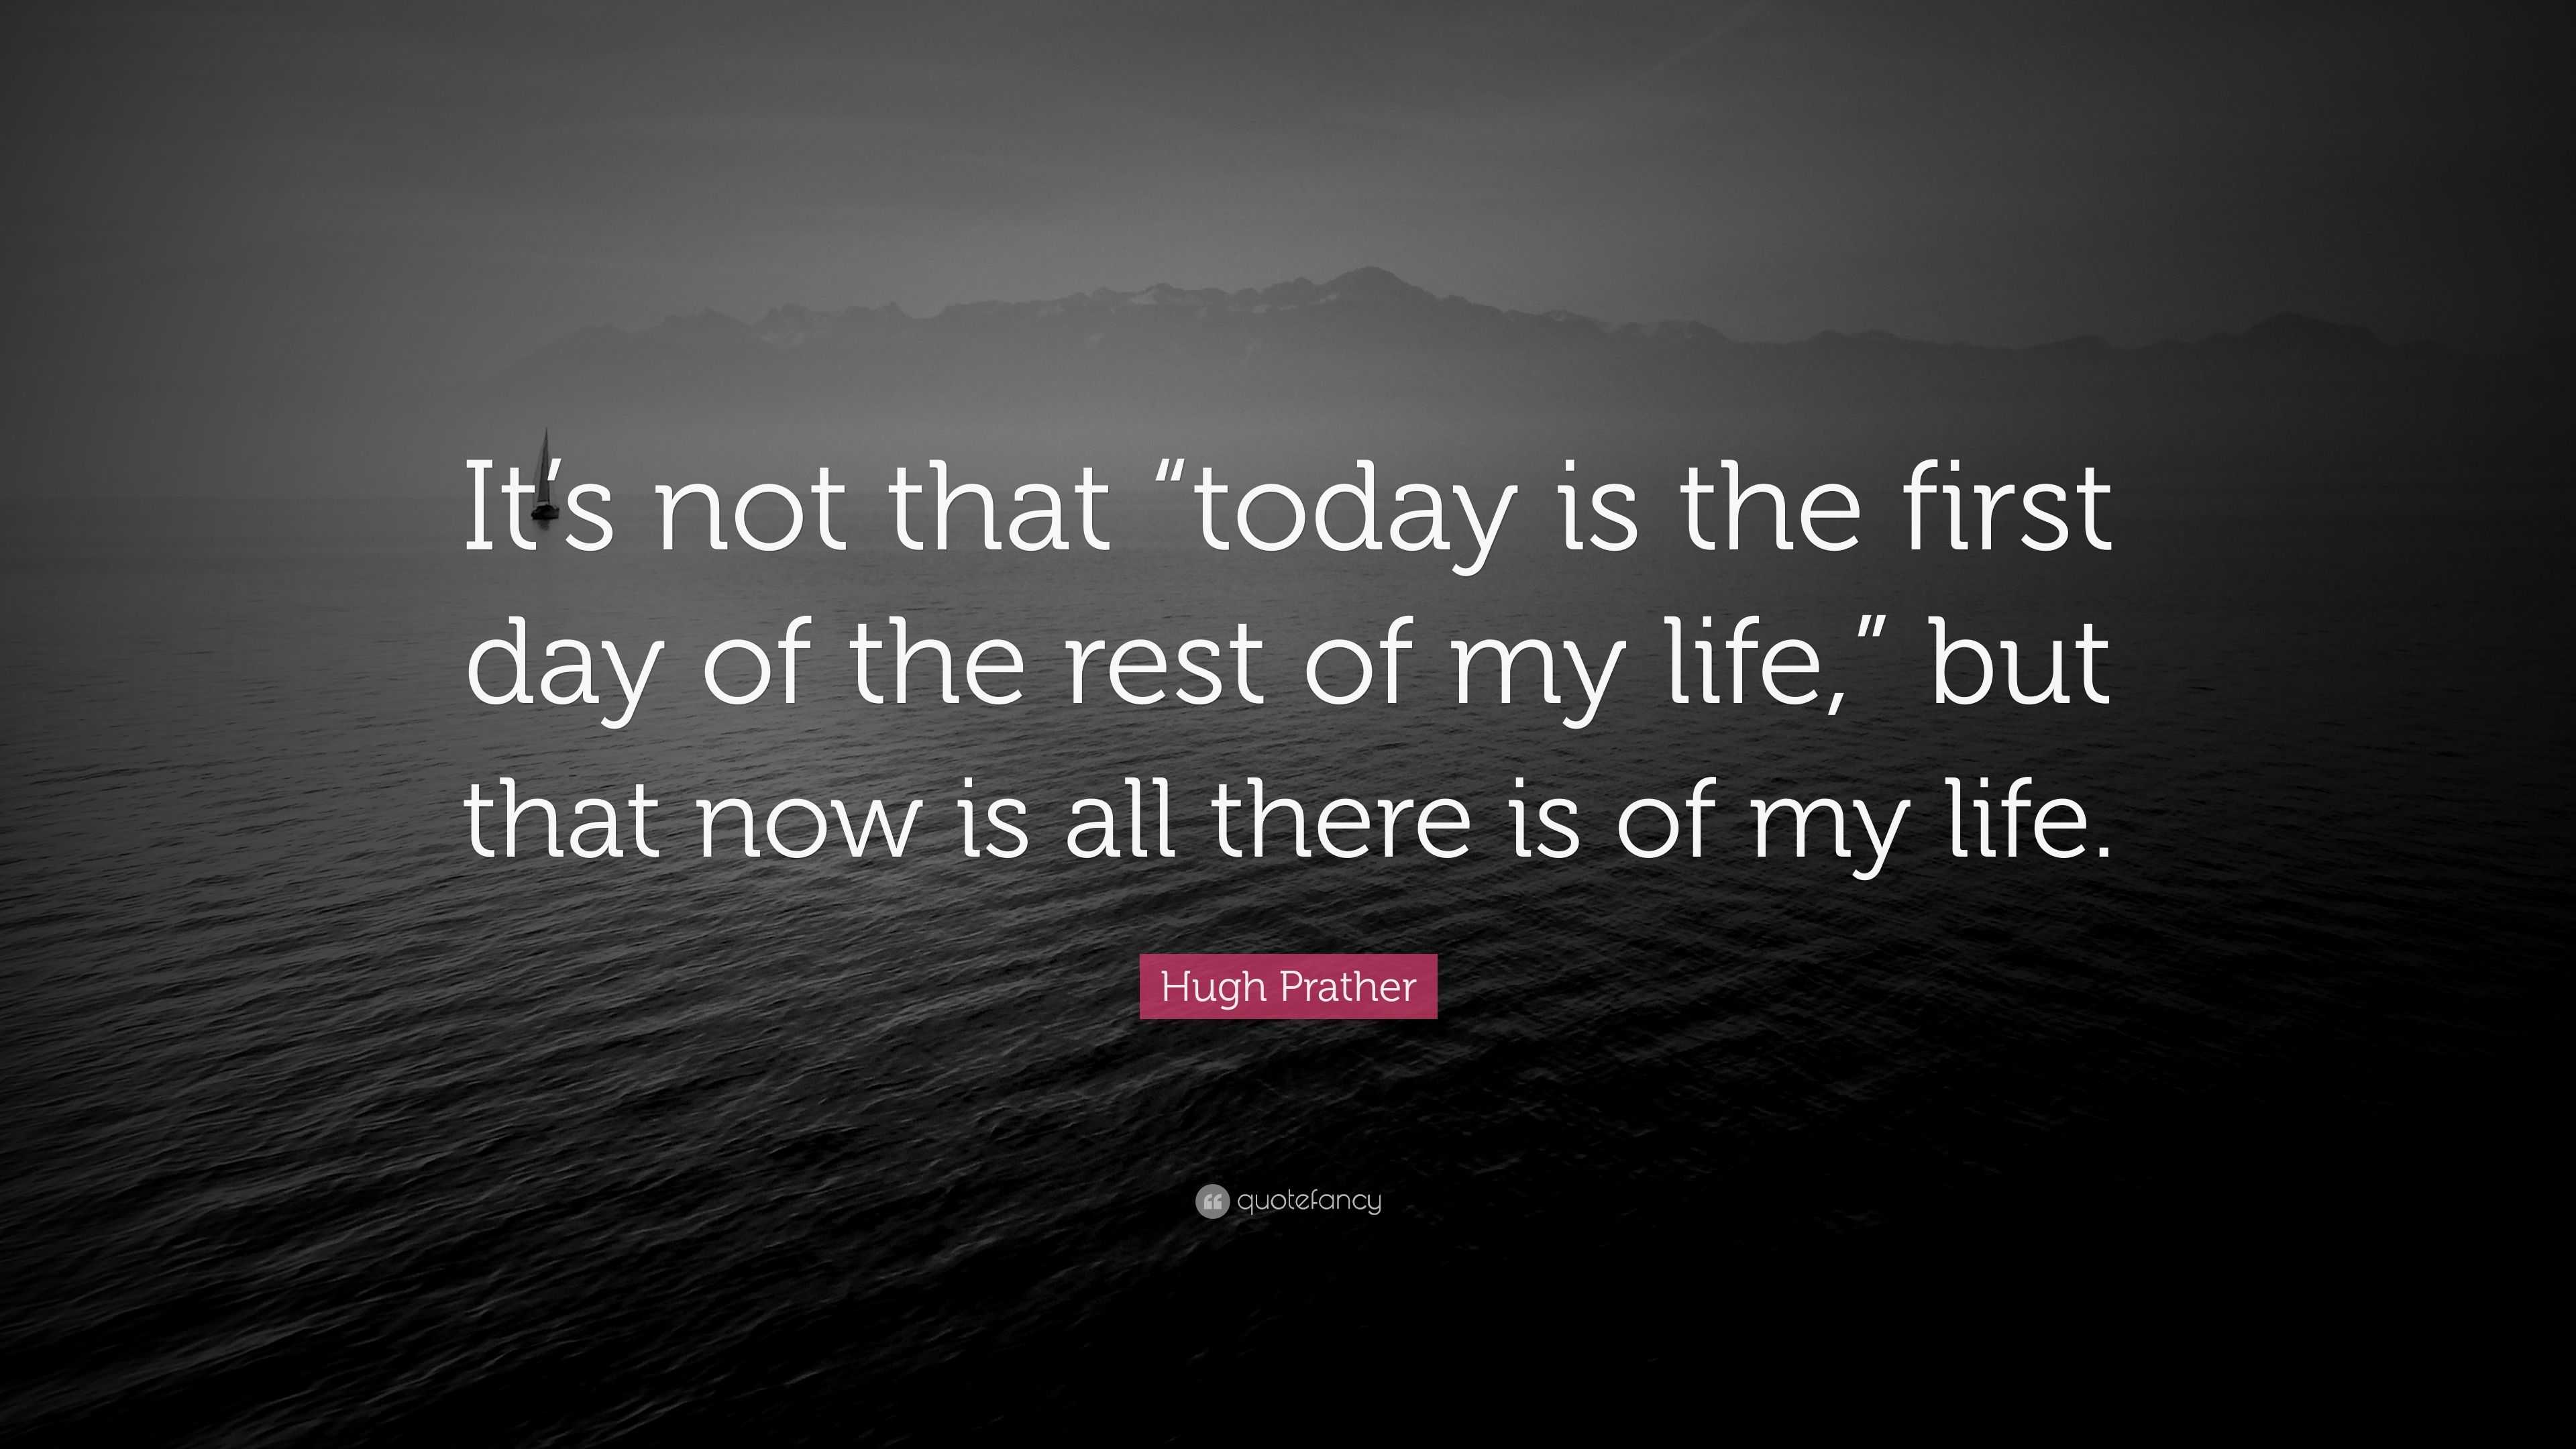 Hugh Prather Quote: "It's not that "today is the first day of the rest of my life," but that now ...